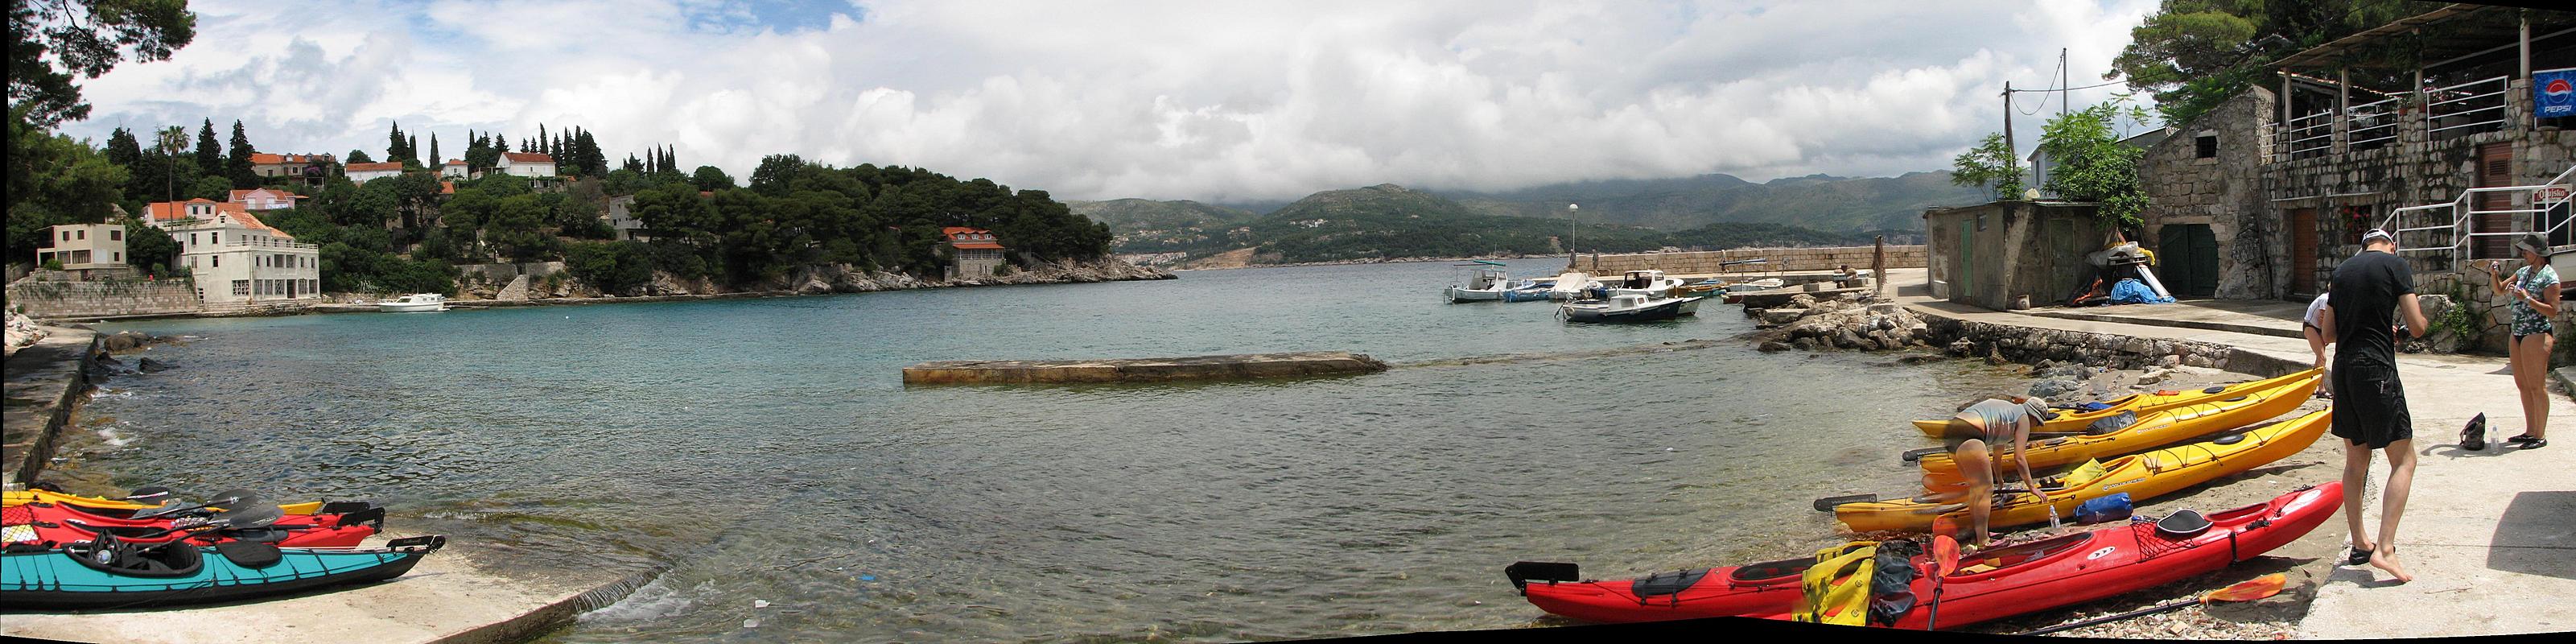 Stop for swimming and lunch on Kolocep island